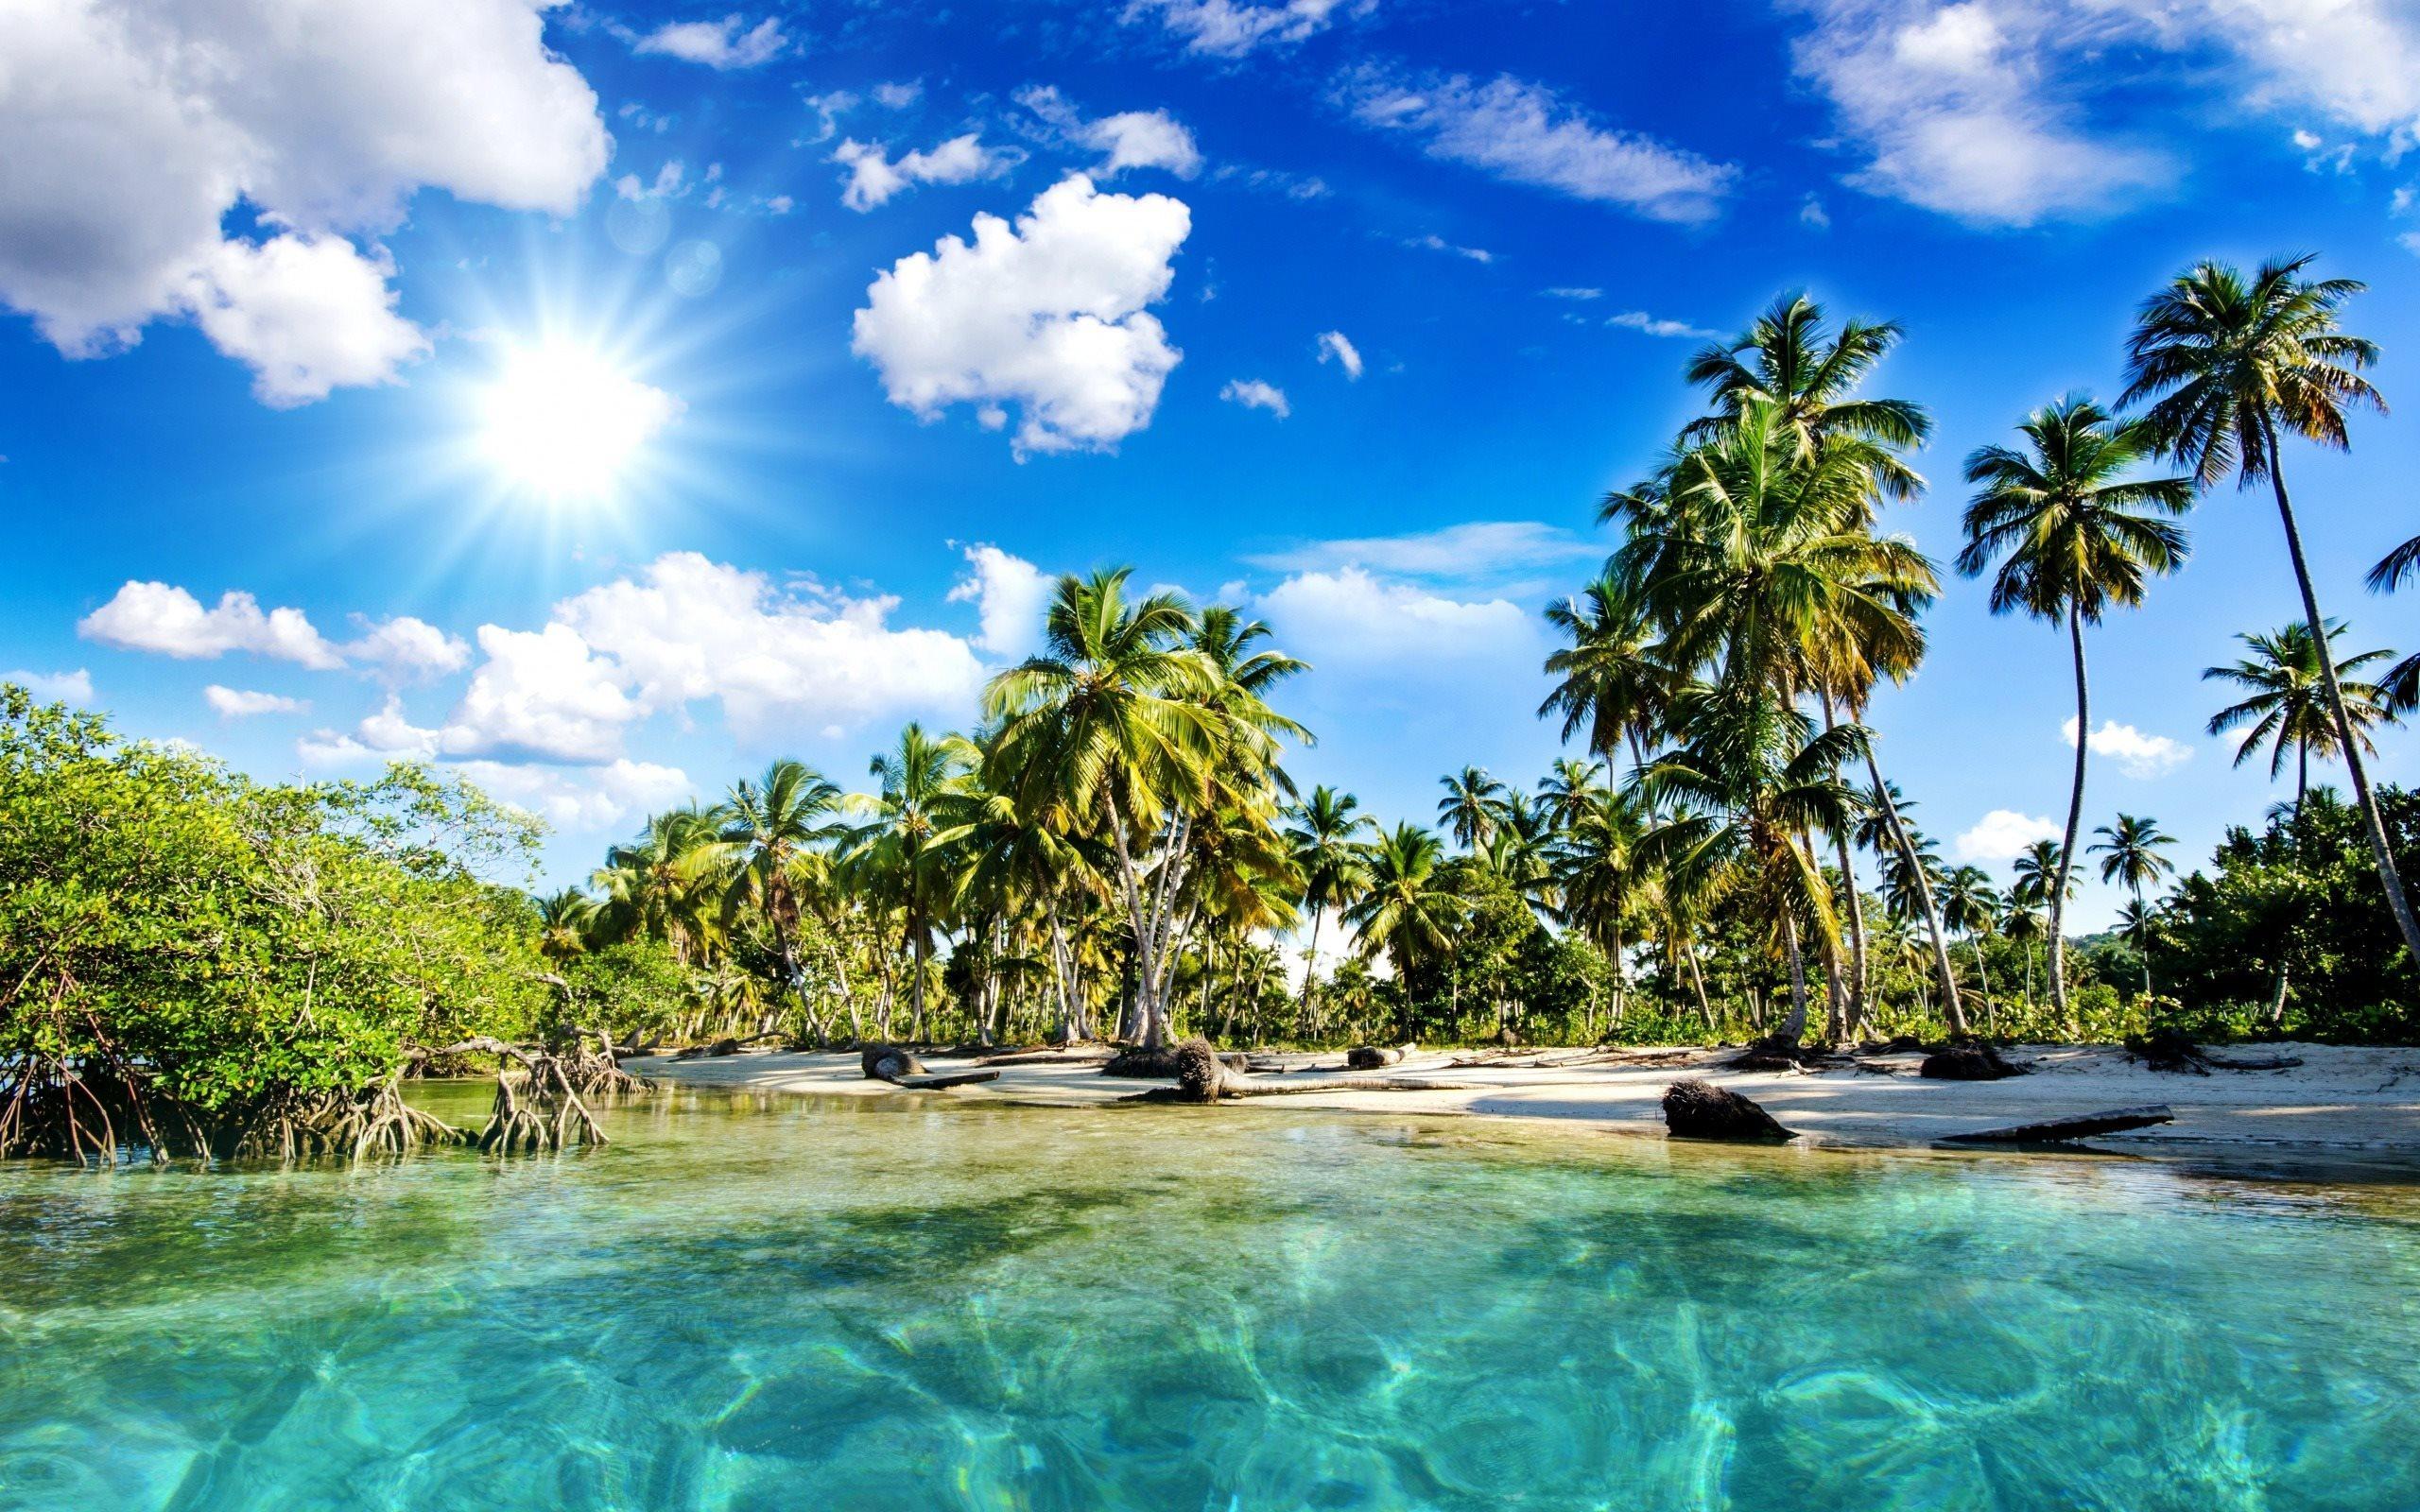 Download wallpaper tropical island, the ocean, palm trees